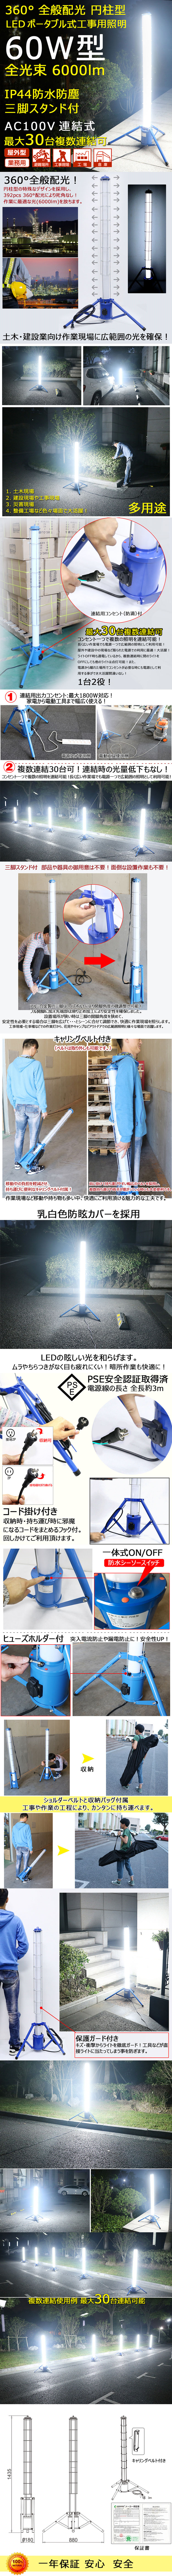 WithProject LED ワークライト LED投光器 60W 7500lm 360度発光 三脚スタンド式 防水型 屋内・屋外兼用 - 4